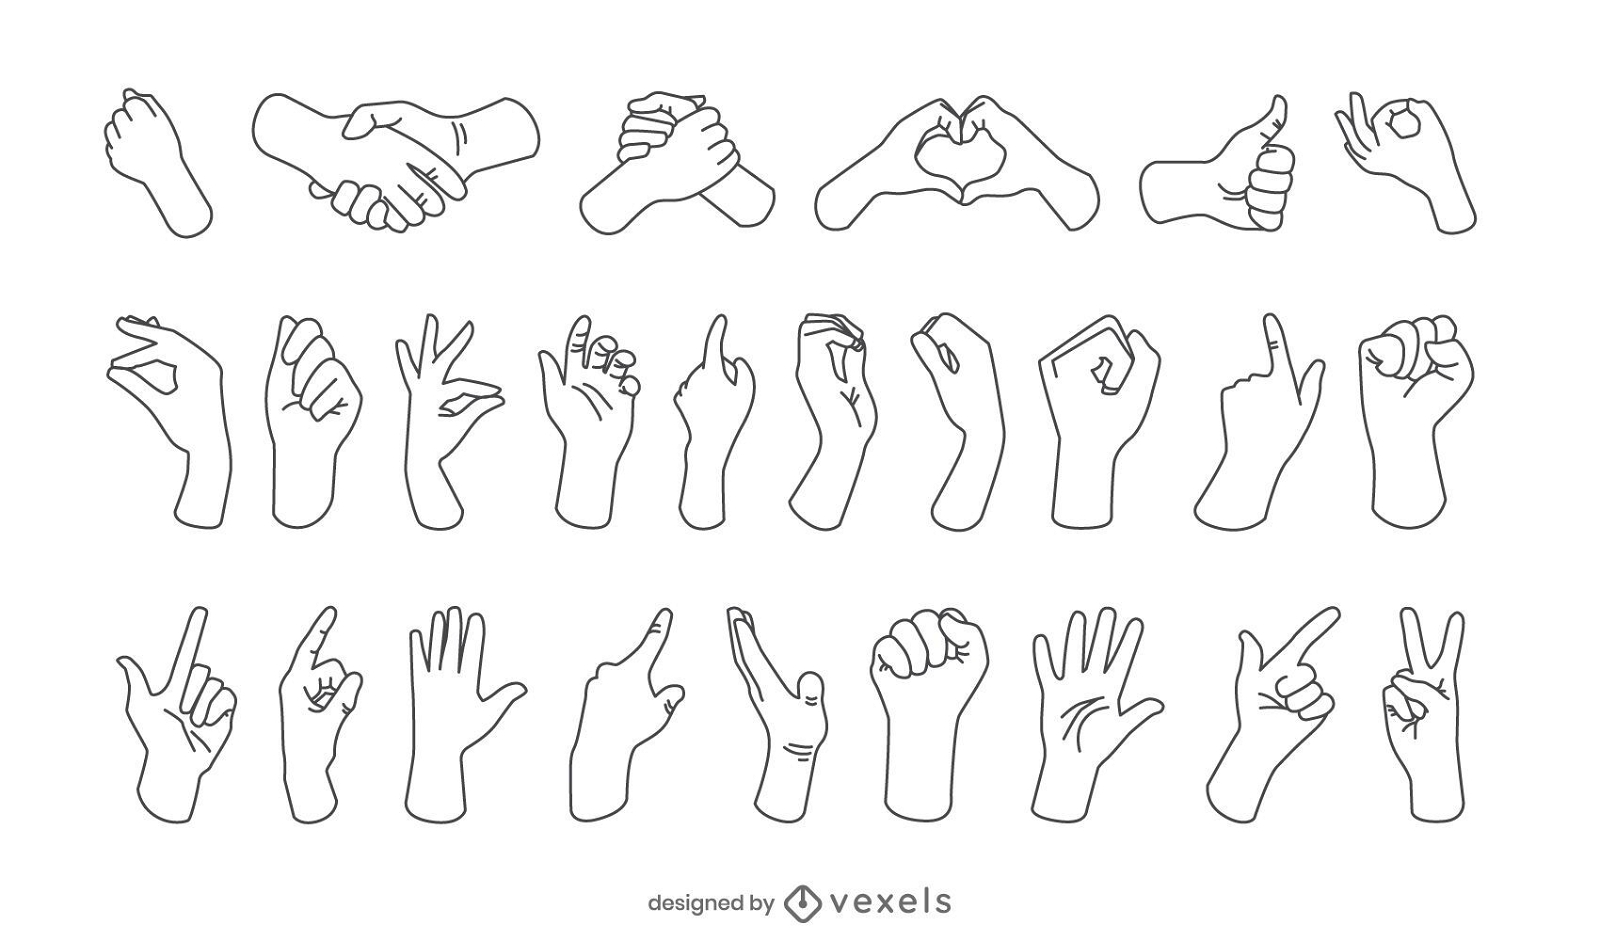 Hand gestures stroke collection